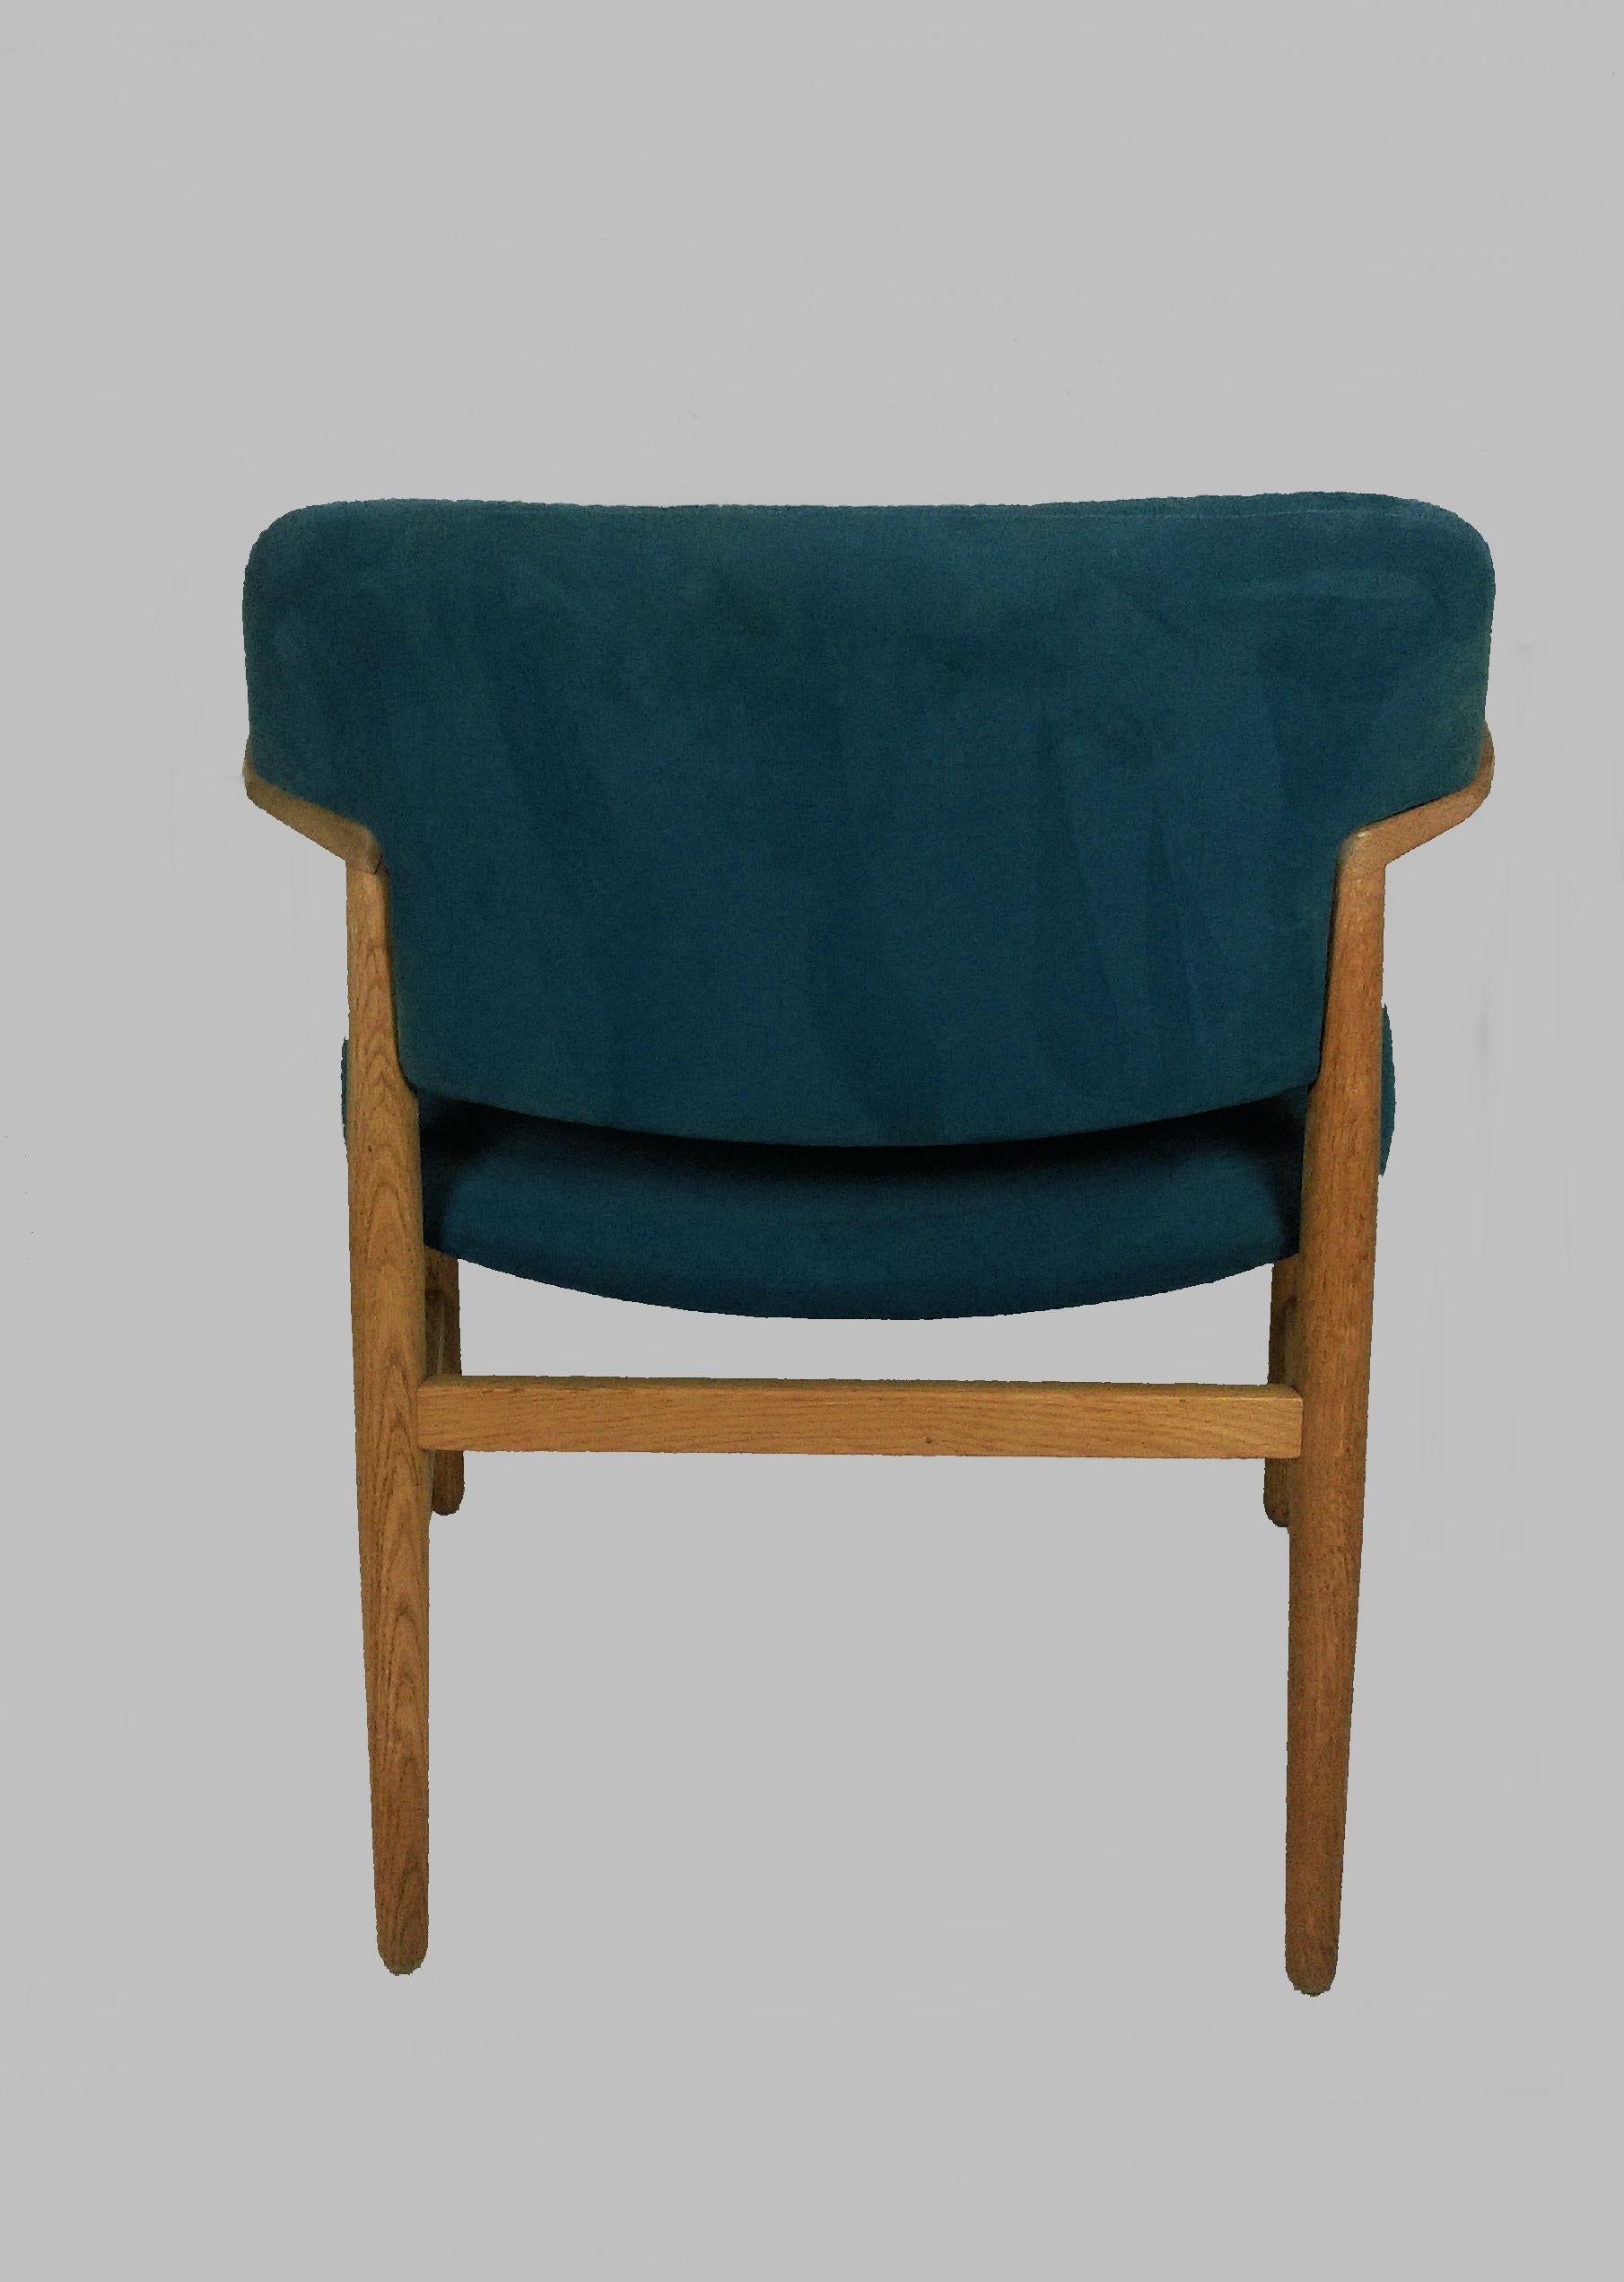 Mid-20th Century Ejner Larsen and Axel Bender Madsen Oak Armchair / Desk Chair, Inc. Reupholstery For Sale